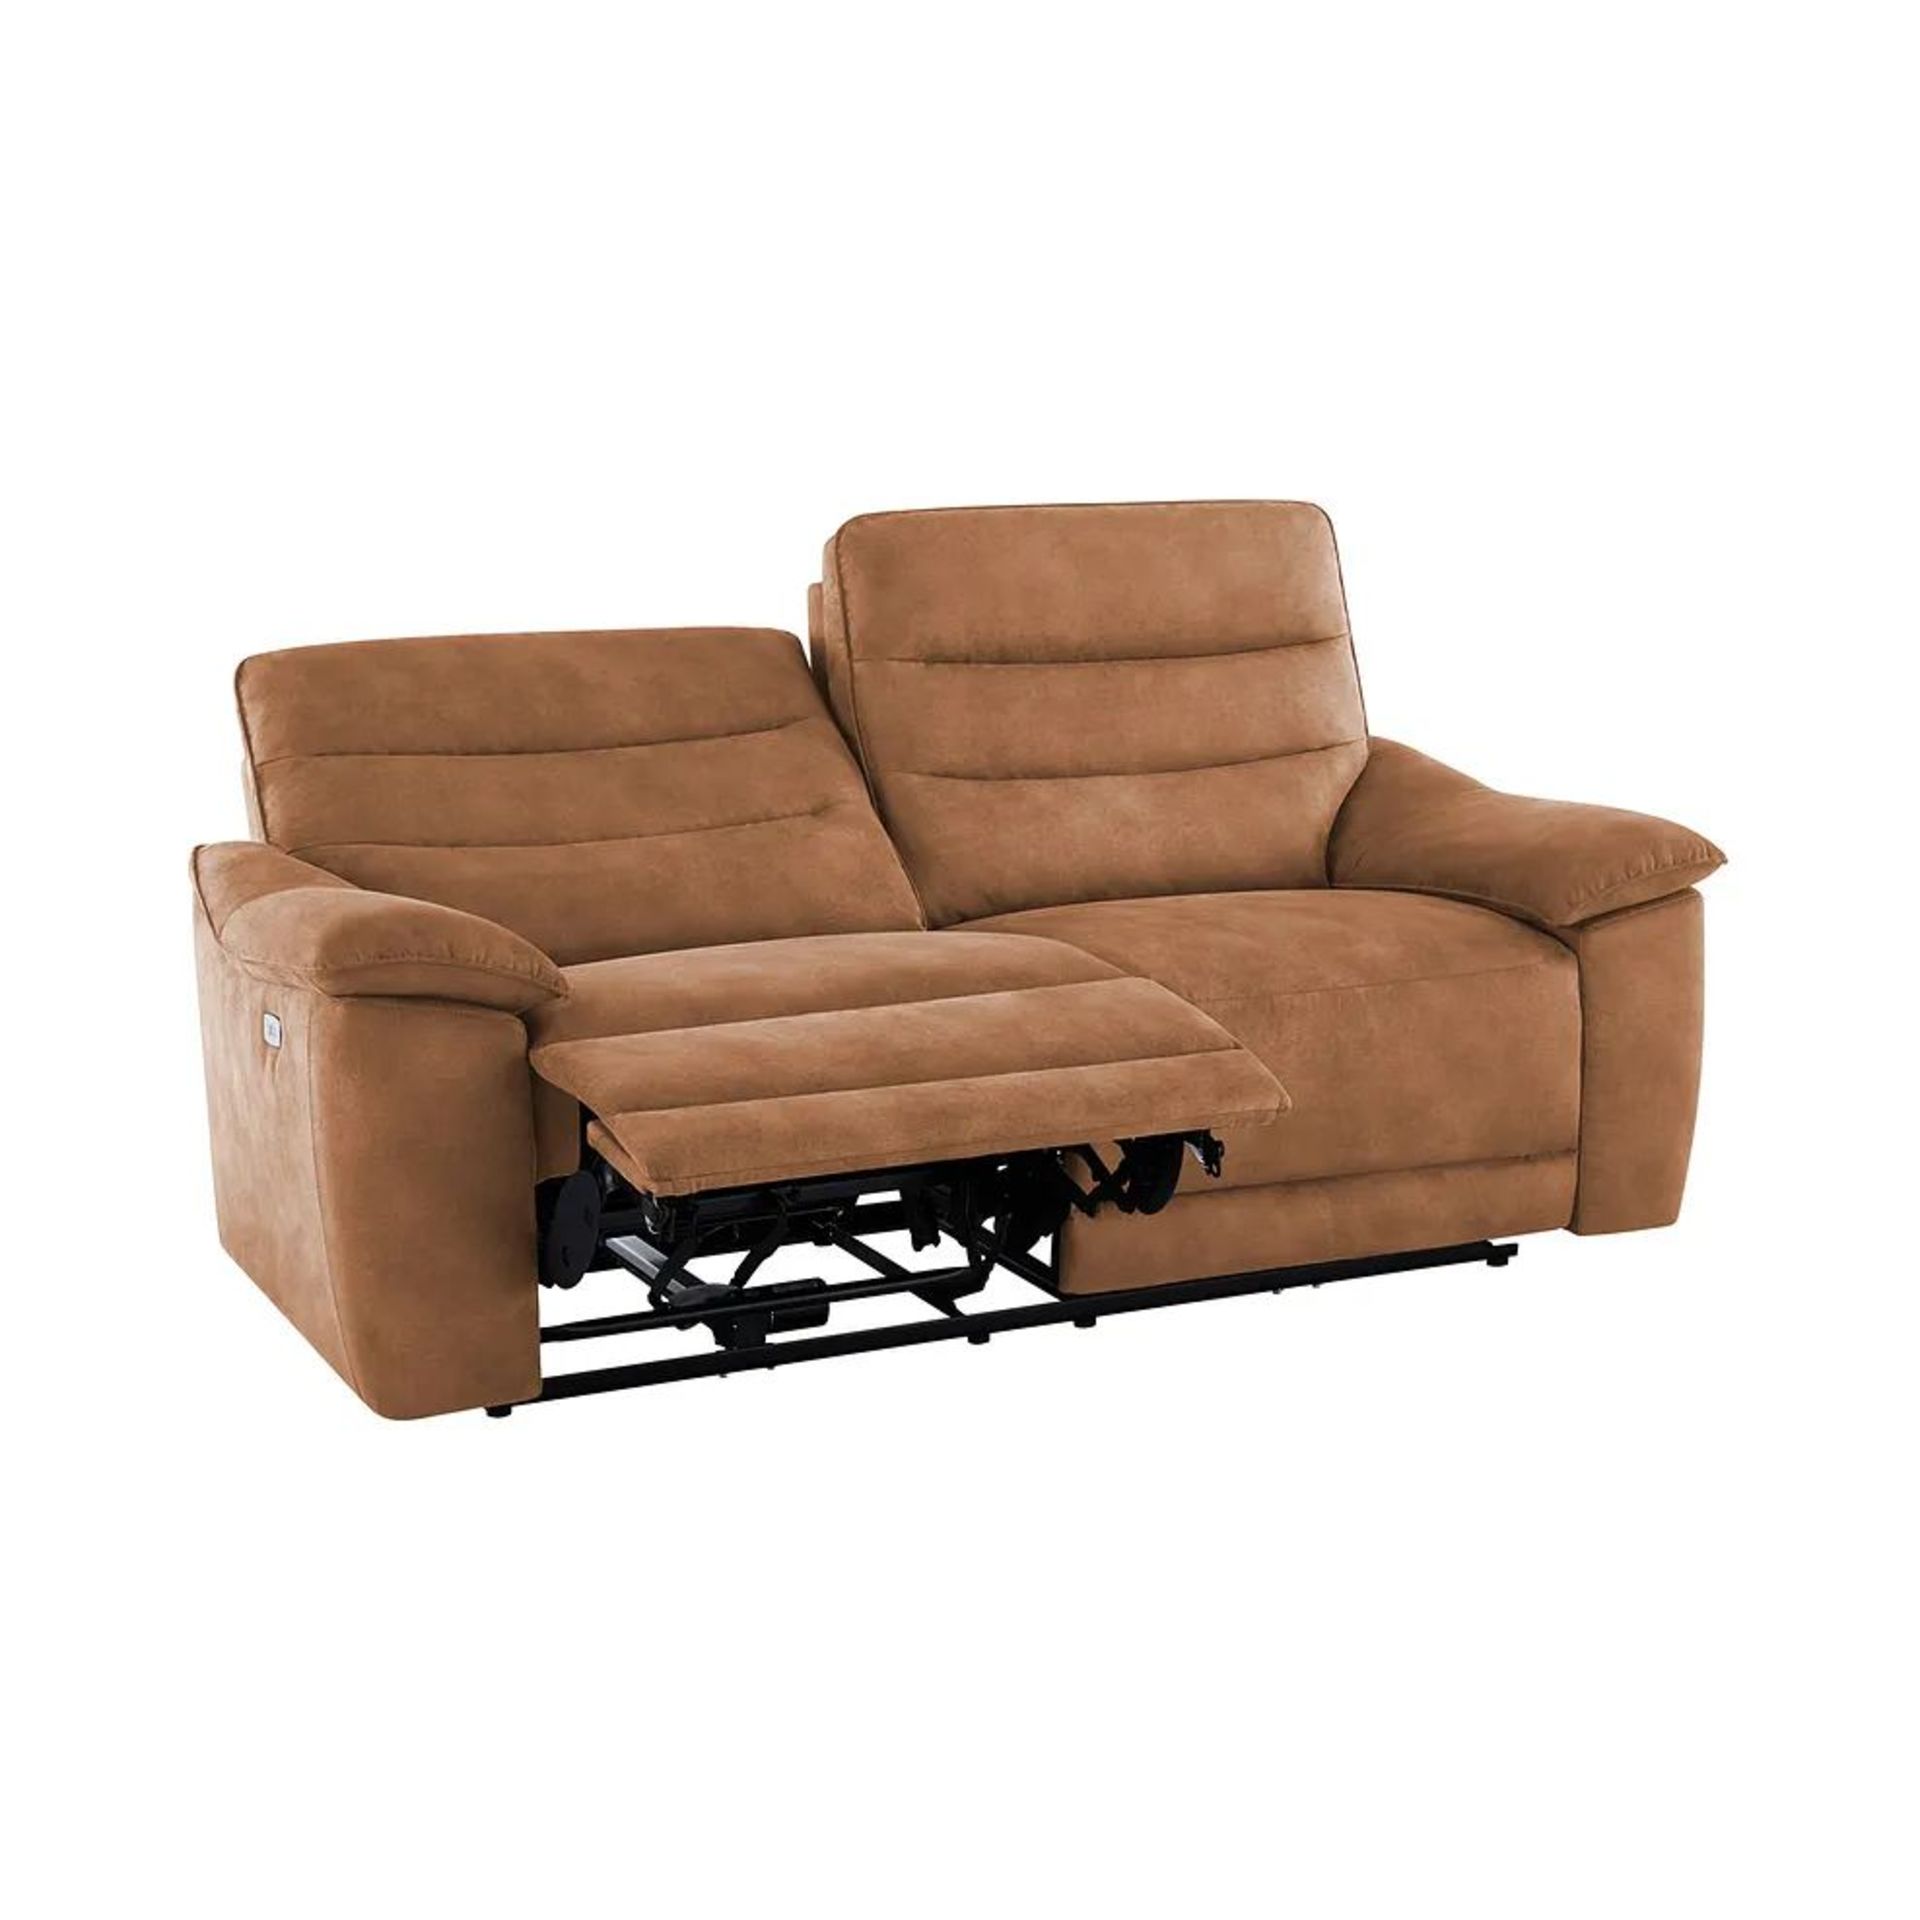 BRAND NEW CARTER 3 Seater Electric Recliner Sofa - BROWN FABRIC. RRP £1299. Shown here in Ranch - Image 4 of 12